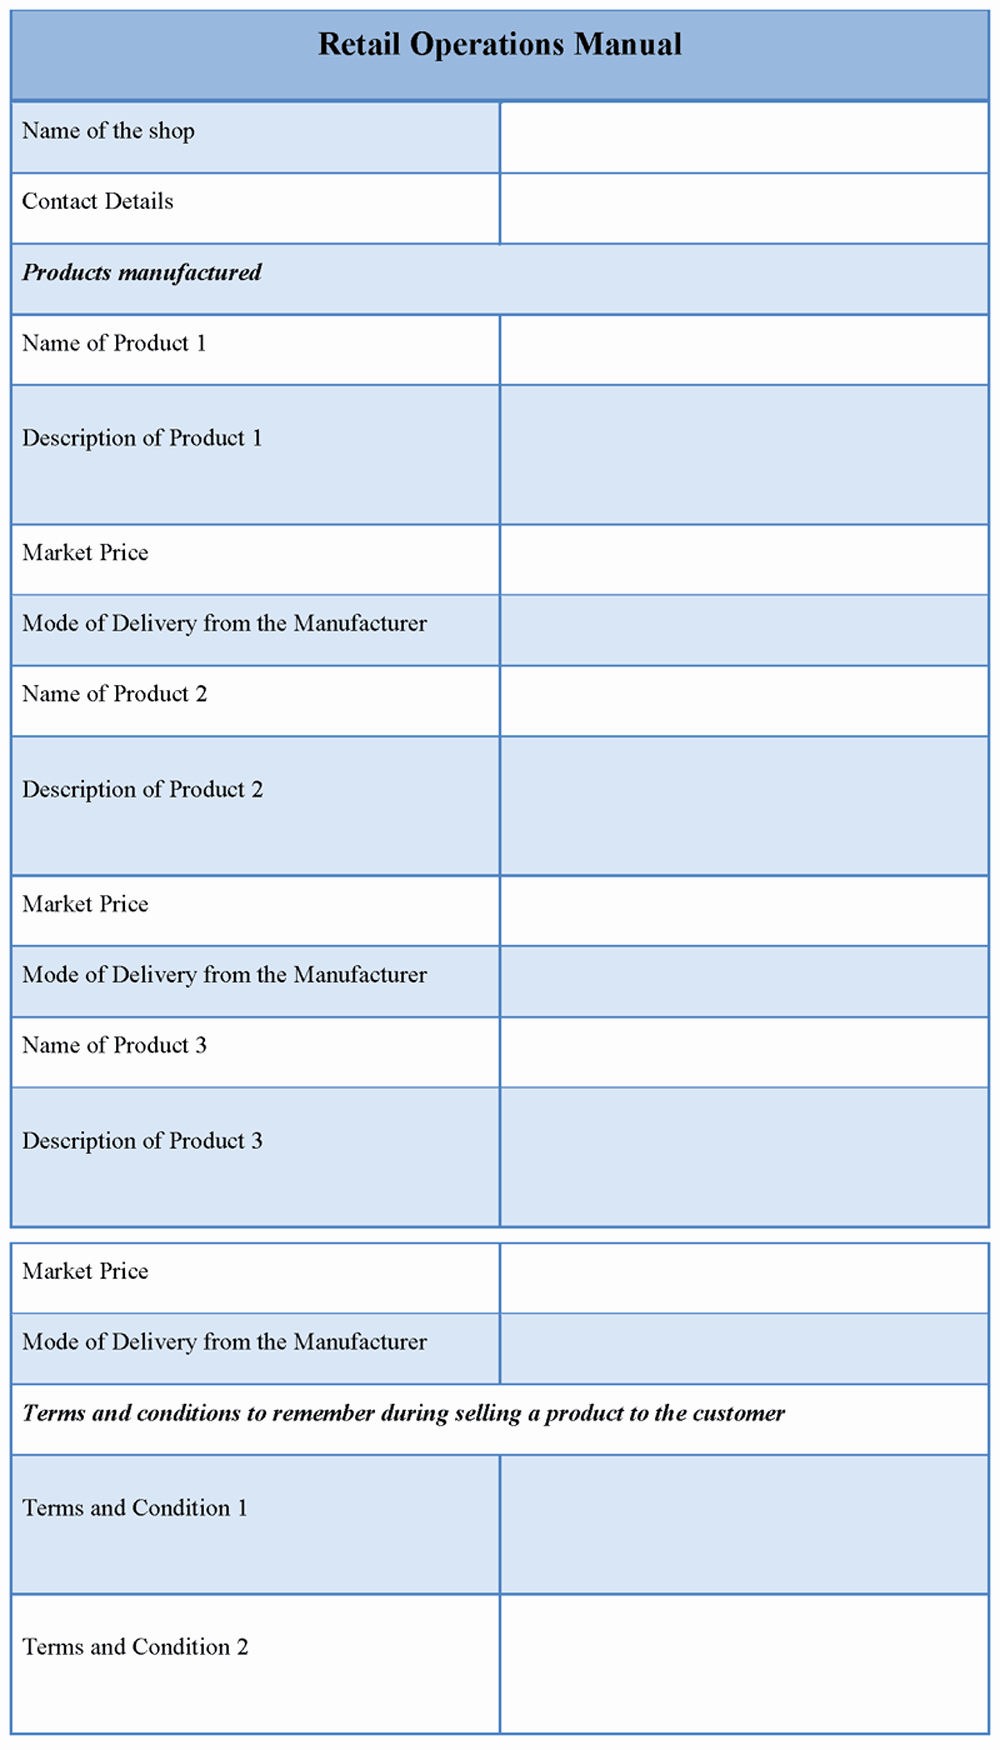 Manual Template for Retail Operations Template Of Retail